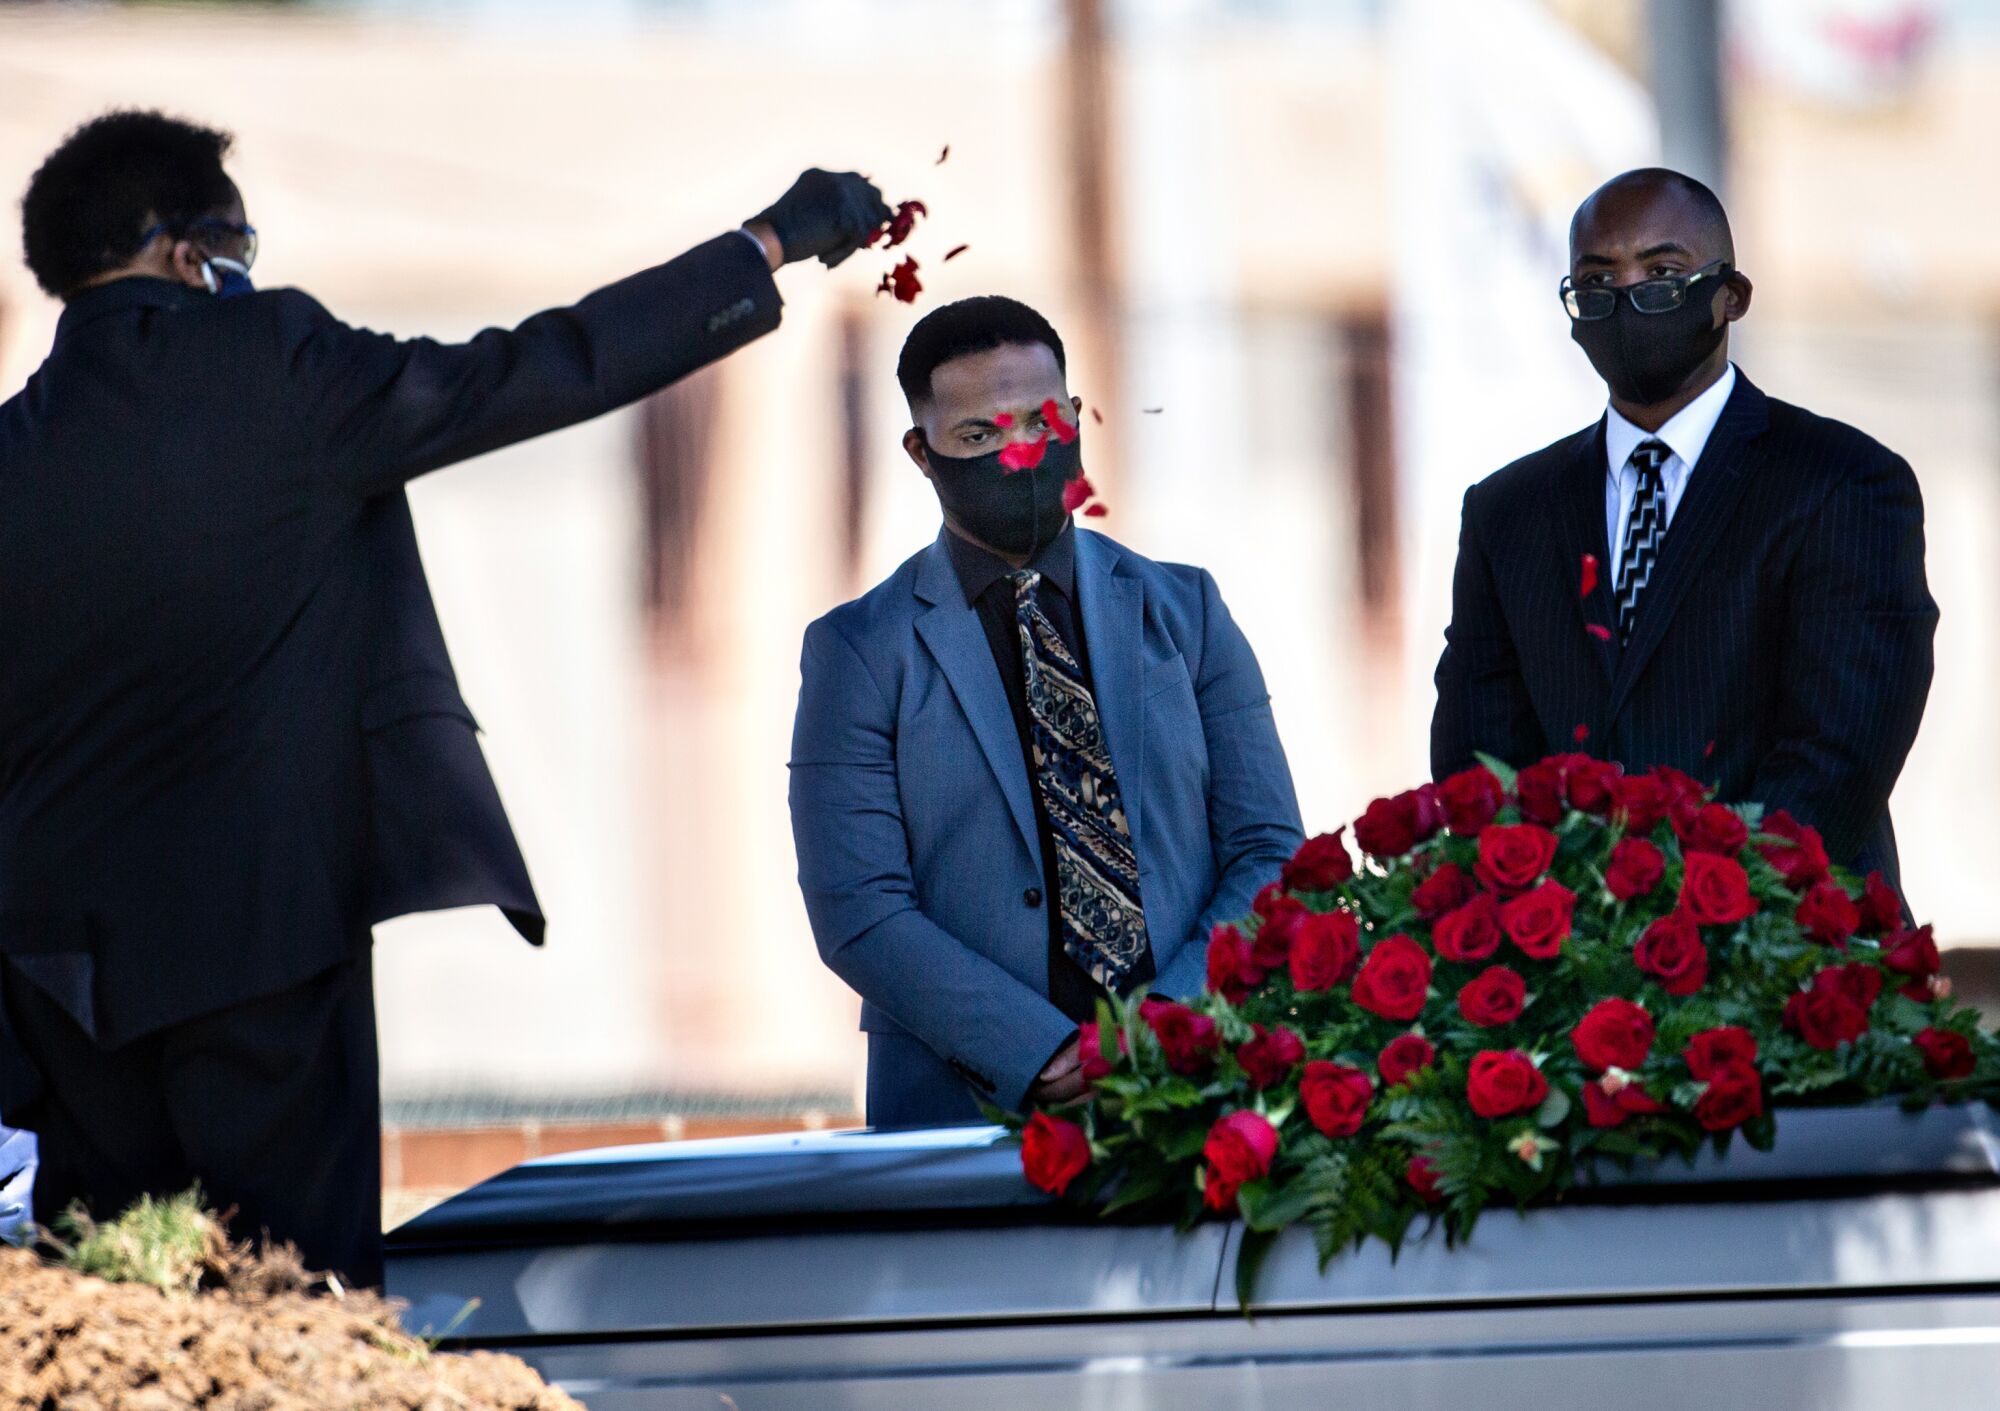 A funeral director, next to mourners, sprinkles rose petals over a casket.